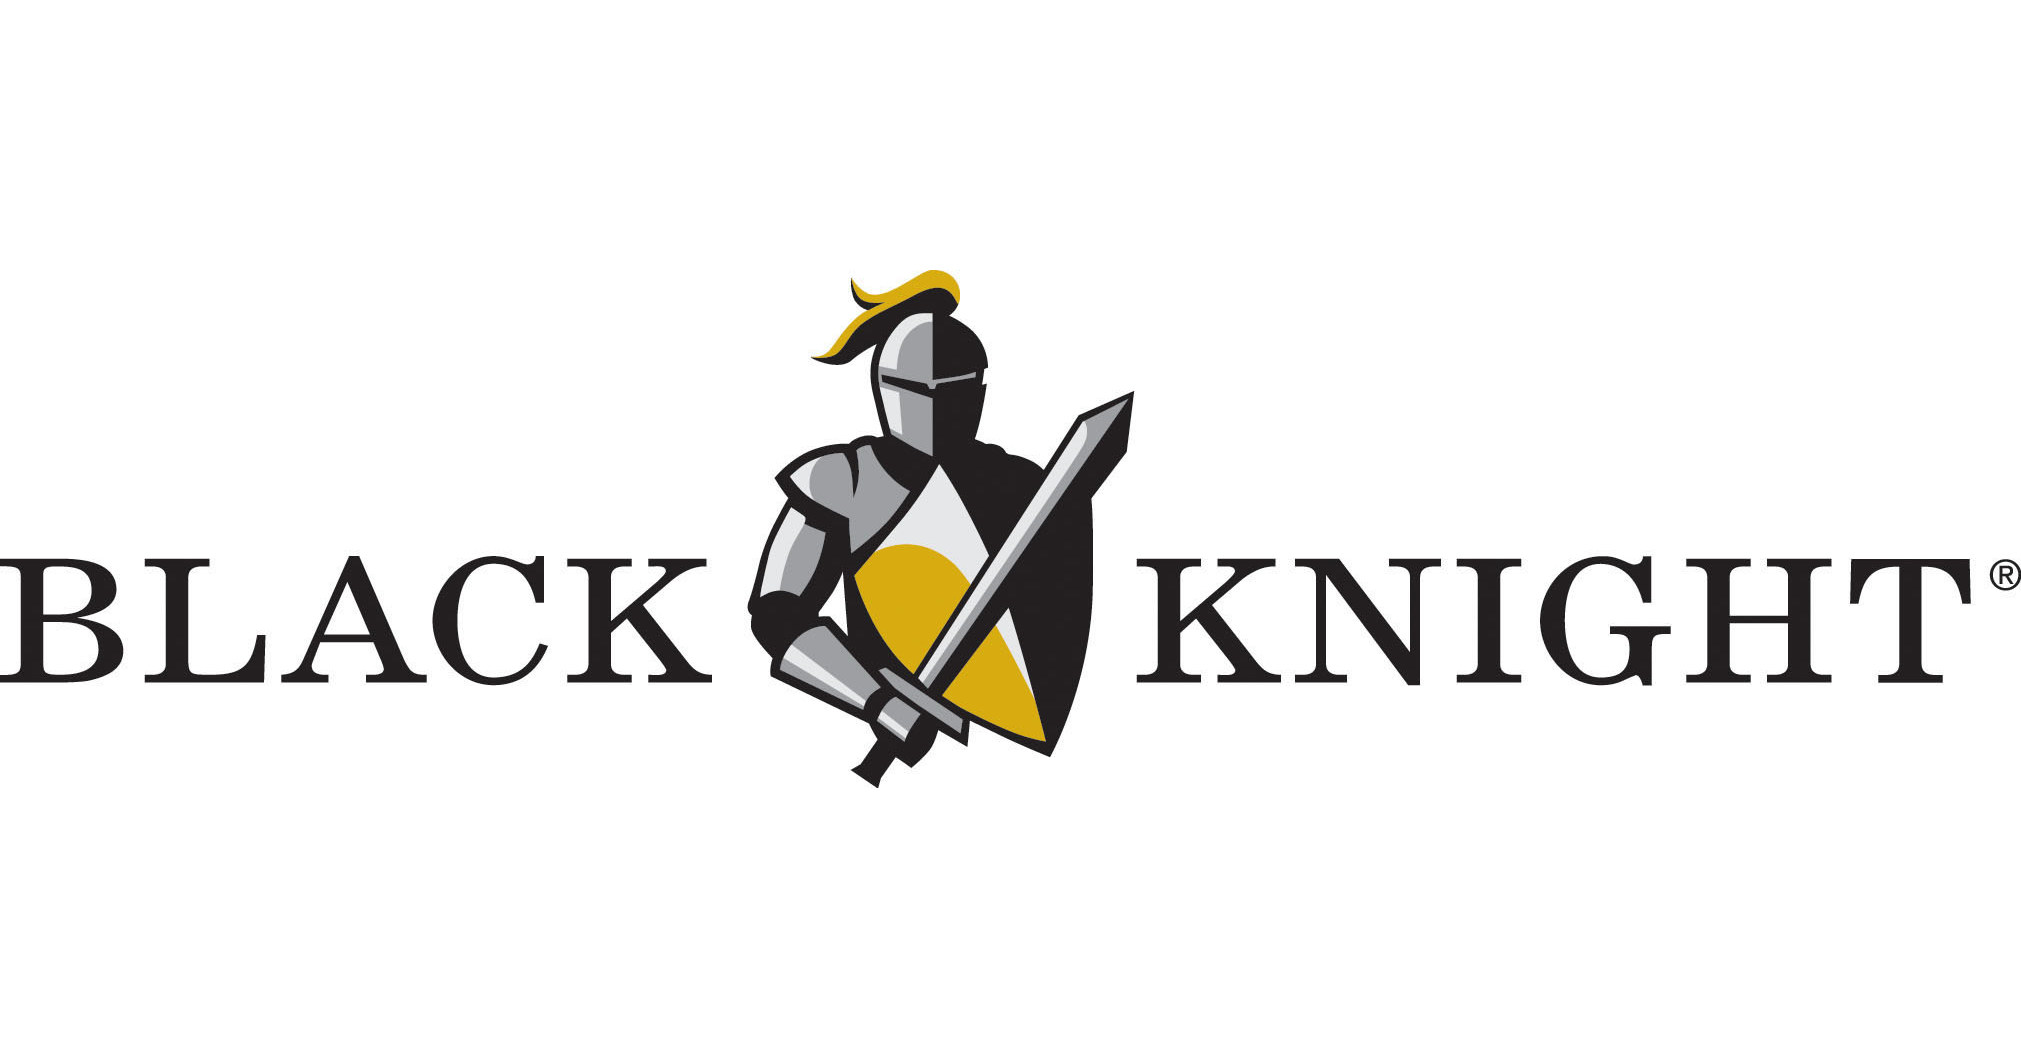 iTHINK Financial Credit Union Signs Contract for the Black Knight Empower LOS to Help Drive Growth and Provide Members With an Exceptional Experience